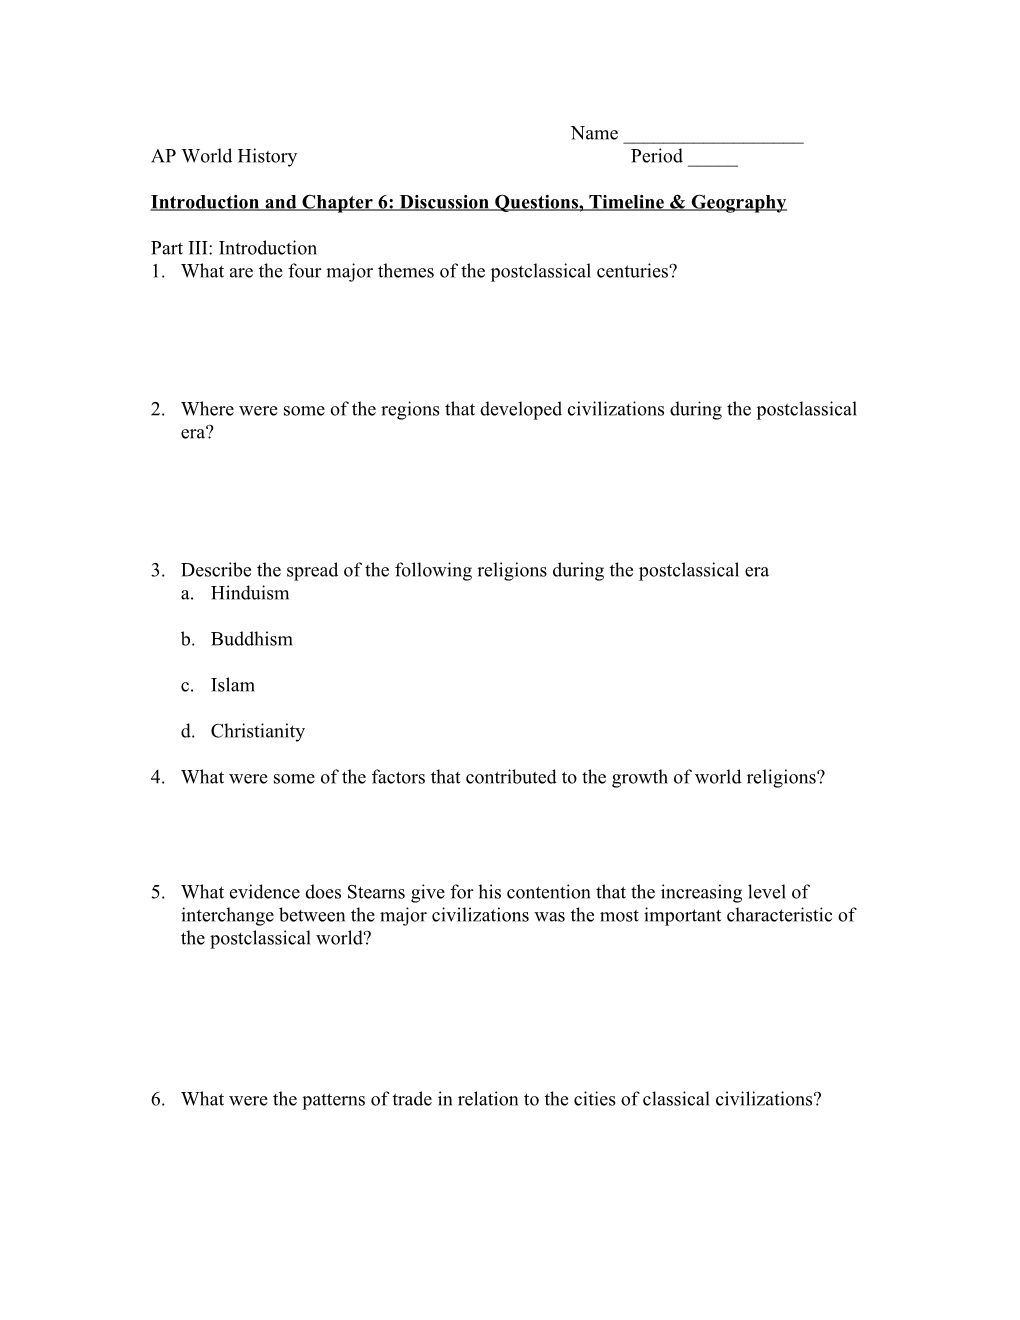 Introduction and Chapter 6: Discussion Questions, Timeline & Geography